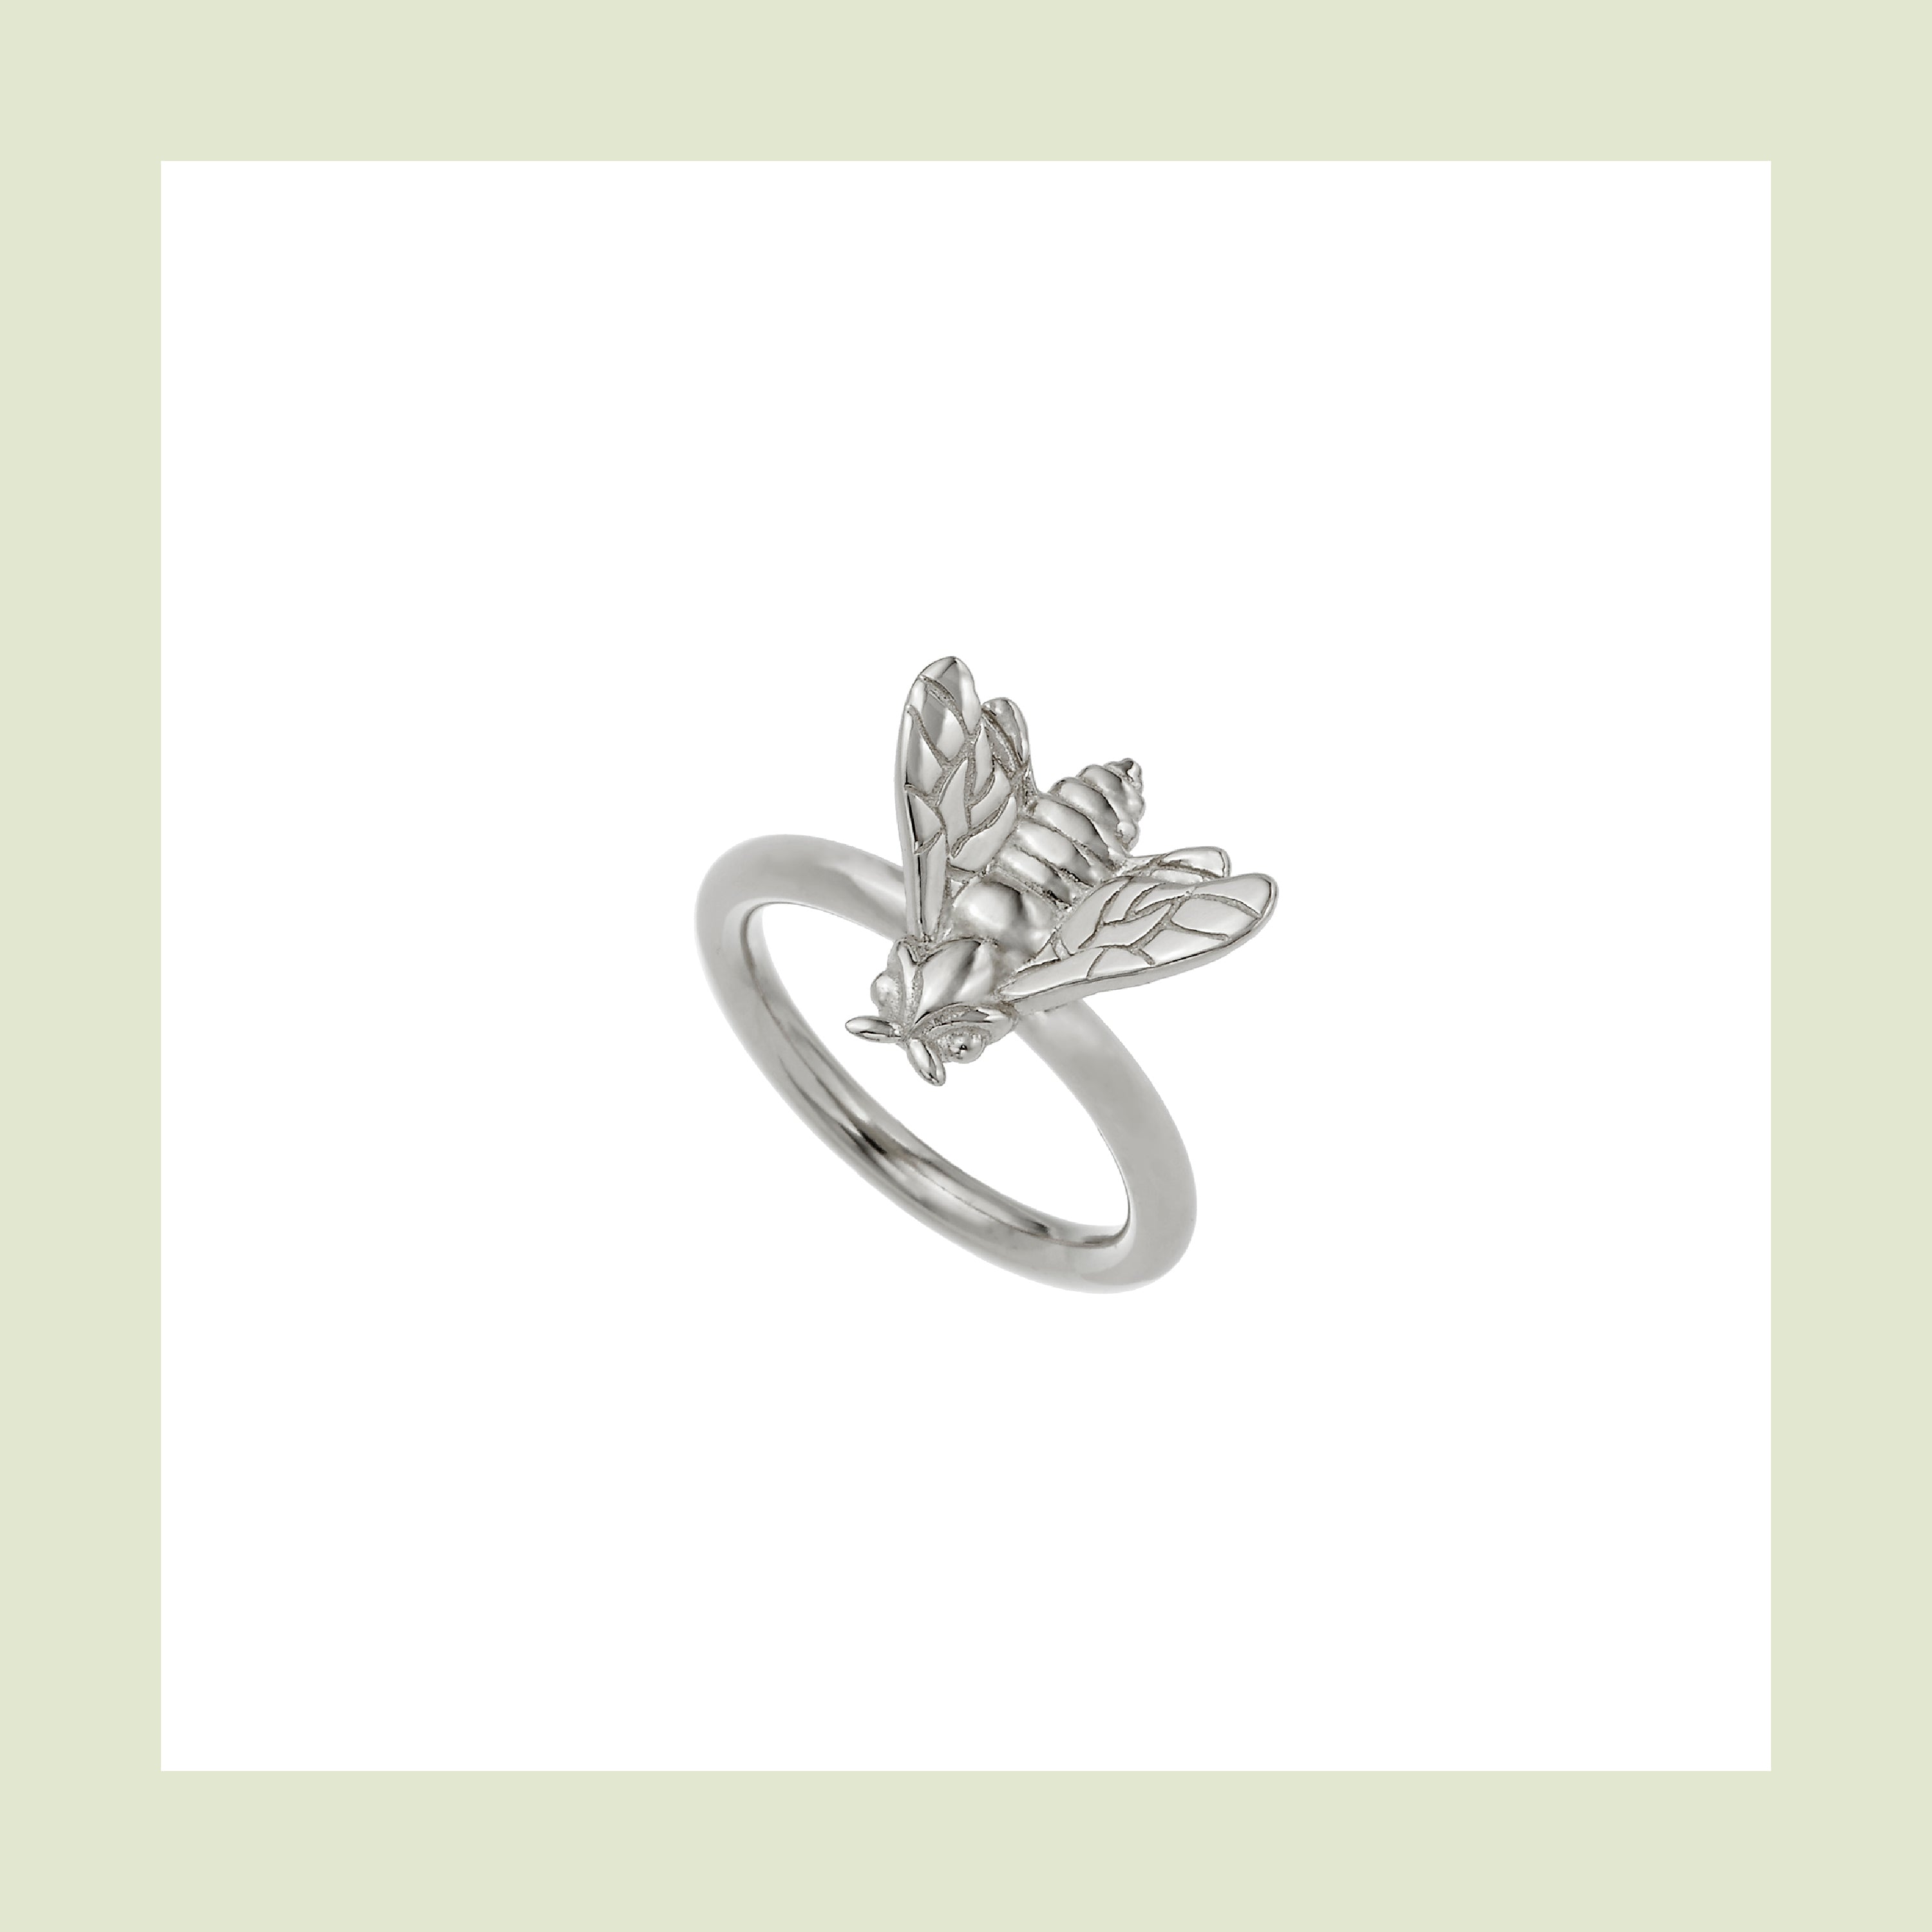 Bee Queen Ring with Small Single Bee